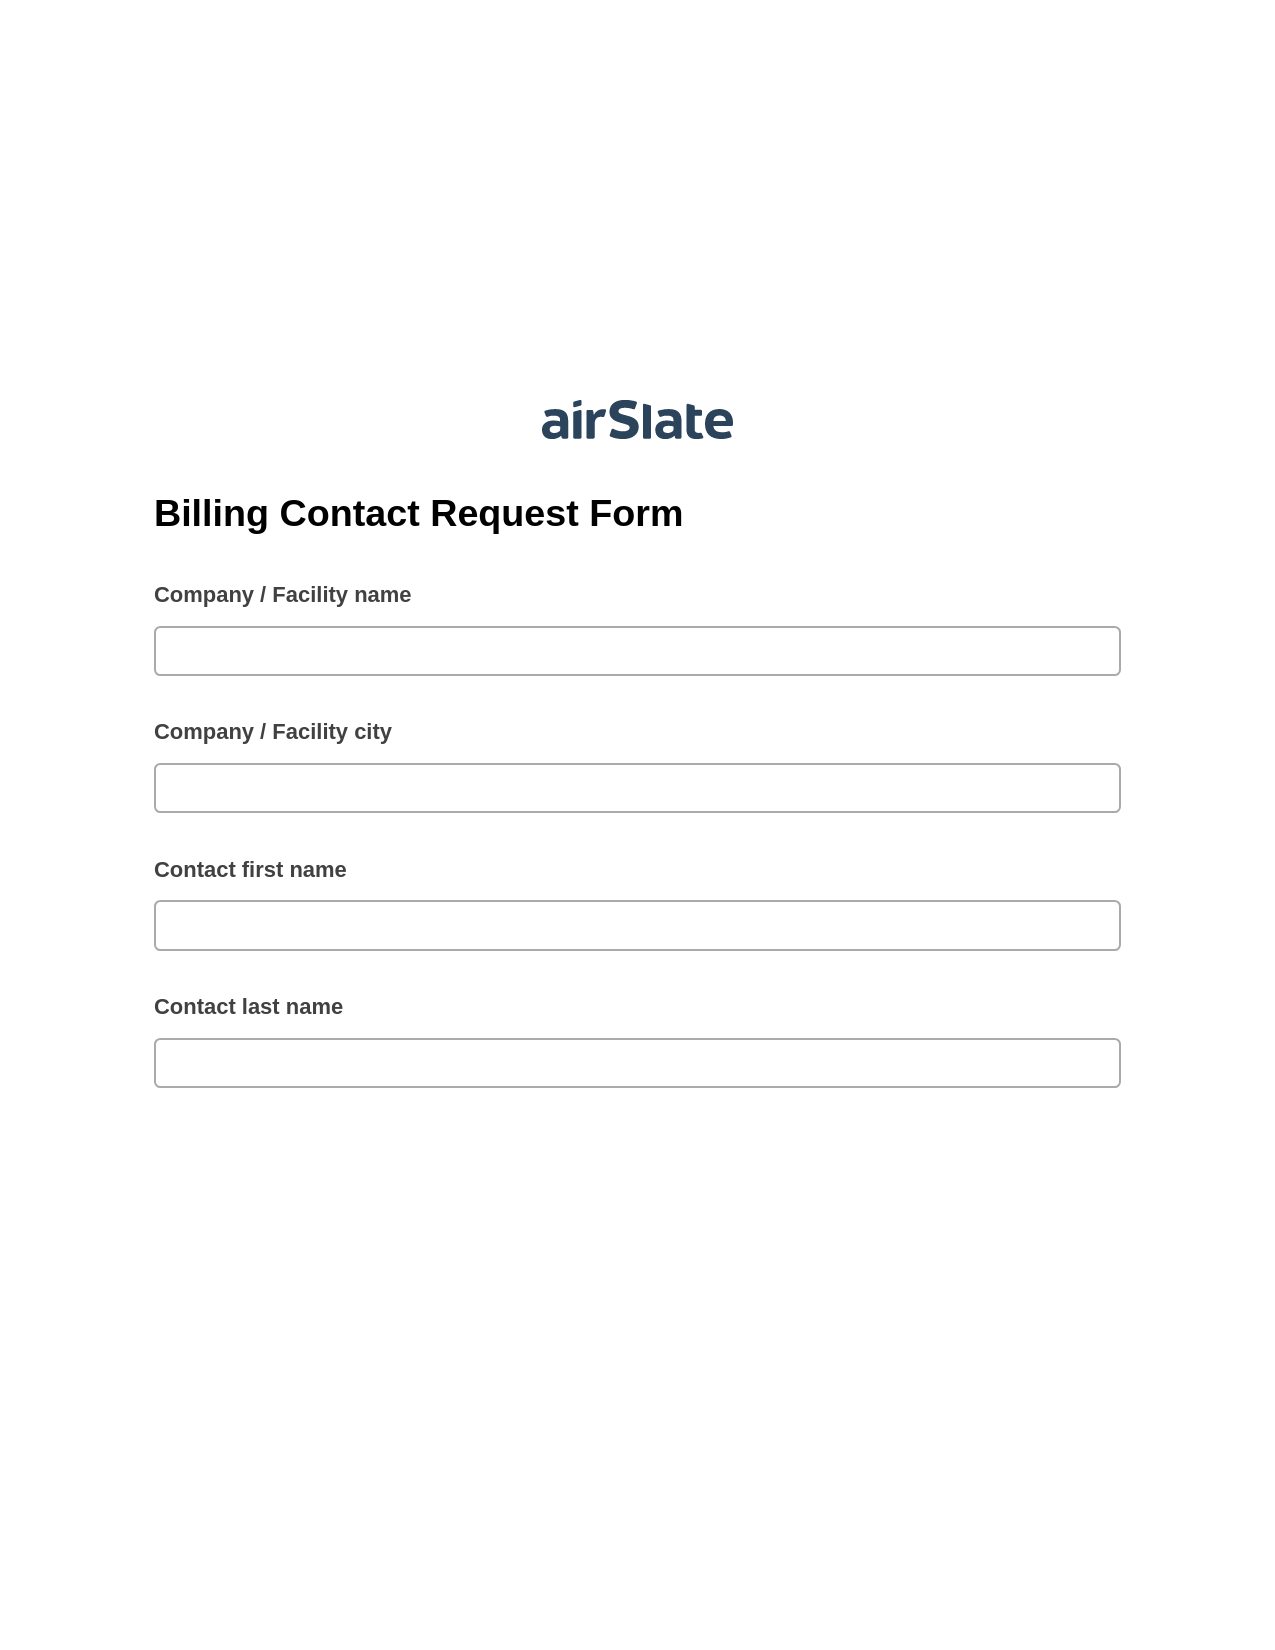 Billing Contact Request Form Pre-fill from NetSuite Records Bot, Export to MS Dynamics 365 Bot, Post-finish Document Bot